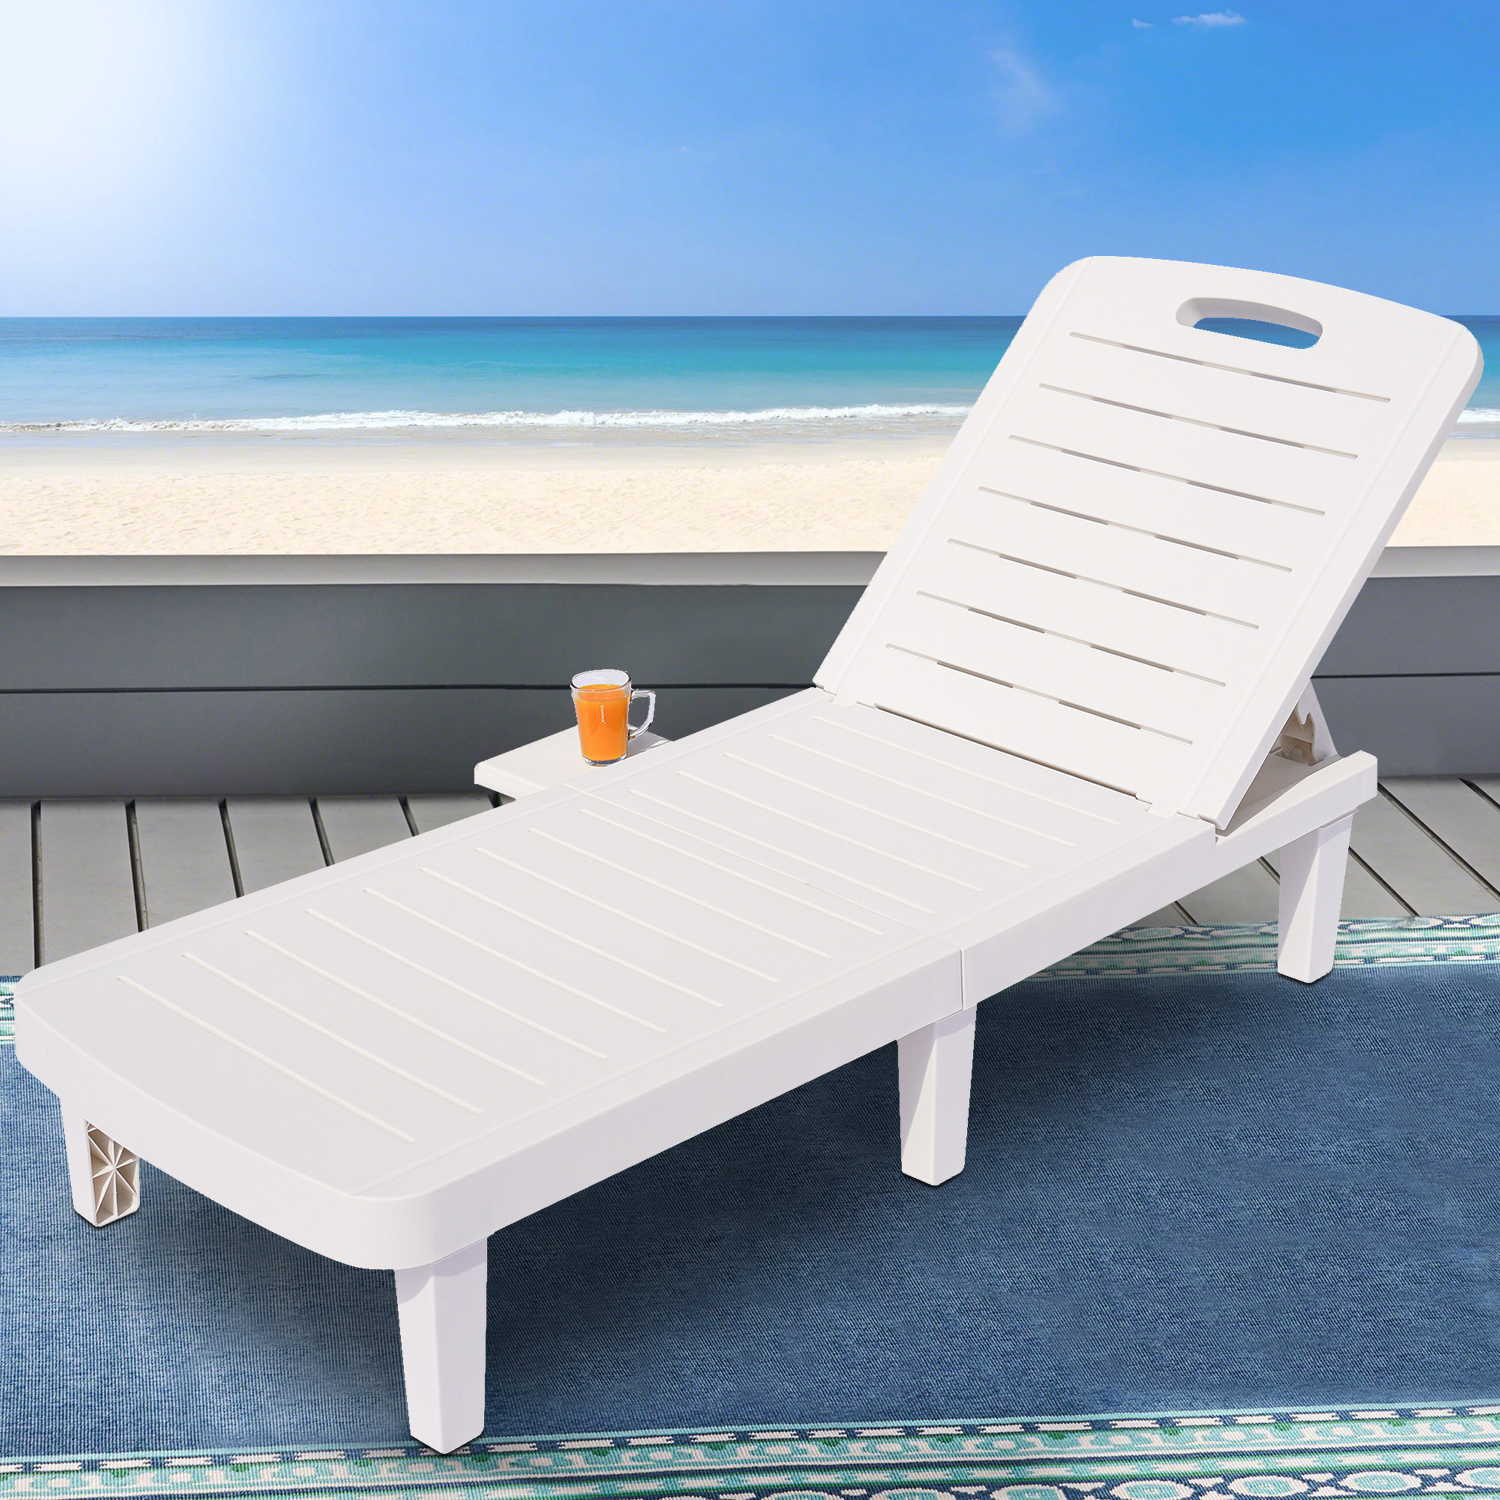 Patio Chaise Lounge, Single Chaise Lounge Chair Patio Furniture Set with Adjustable Back and Retractable Tray, All-Weather Plastic Reclining Lounge Chair for Beach, Backyard, Garden, Pool, L4554 - image 1 of 9